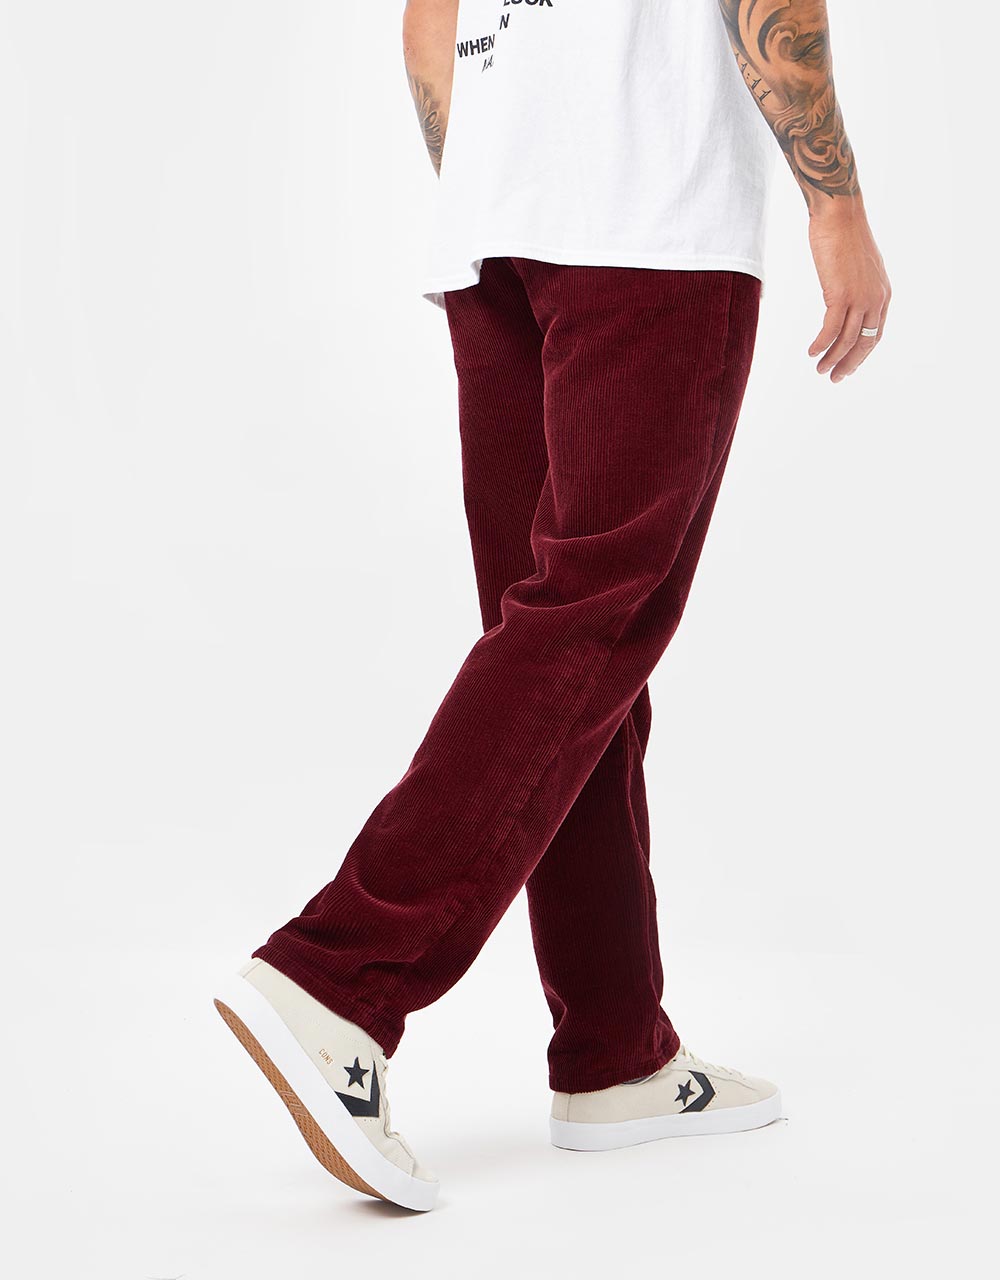 Route One Relaxed Fit Big Wale Cords - Port